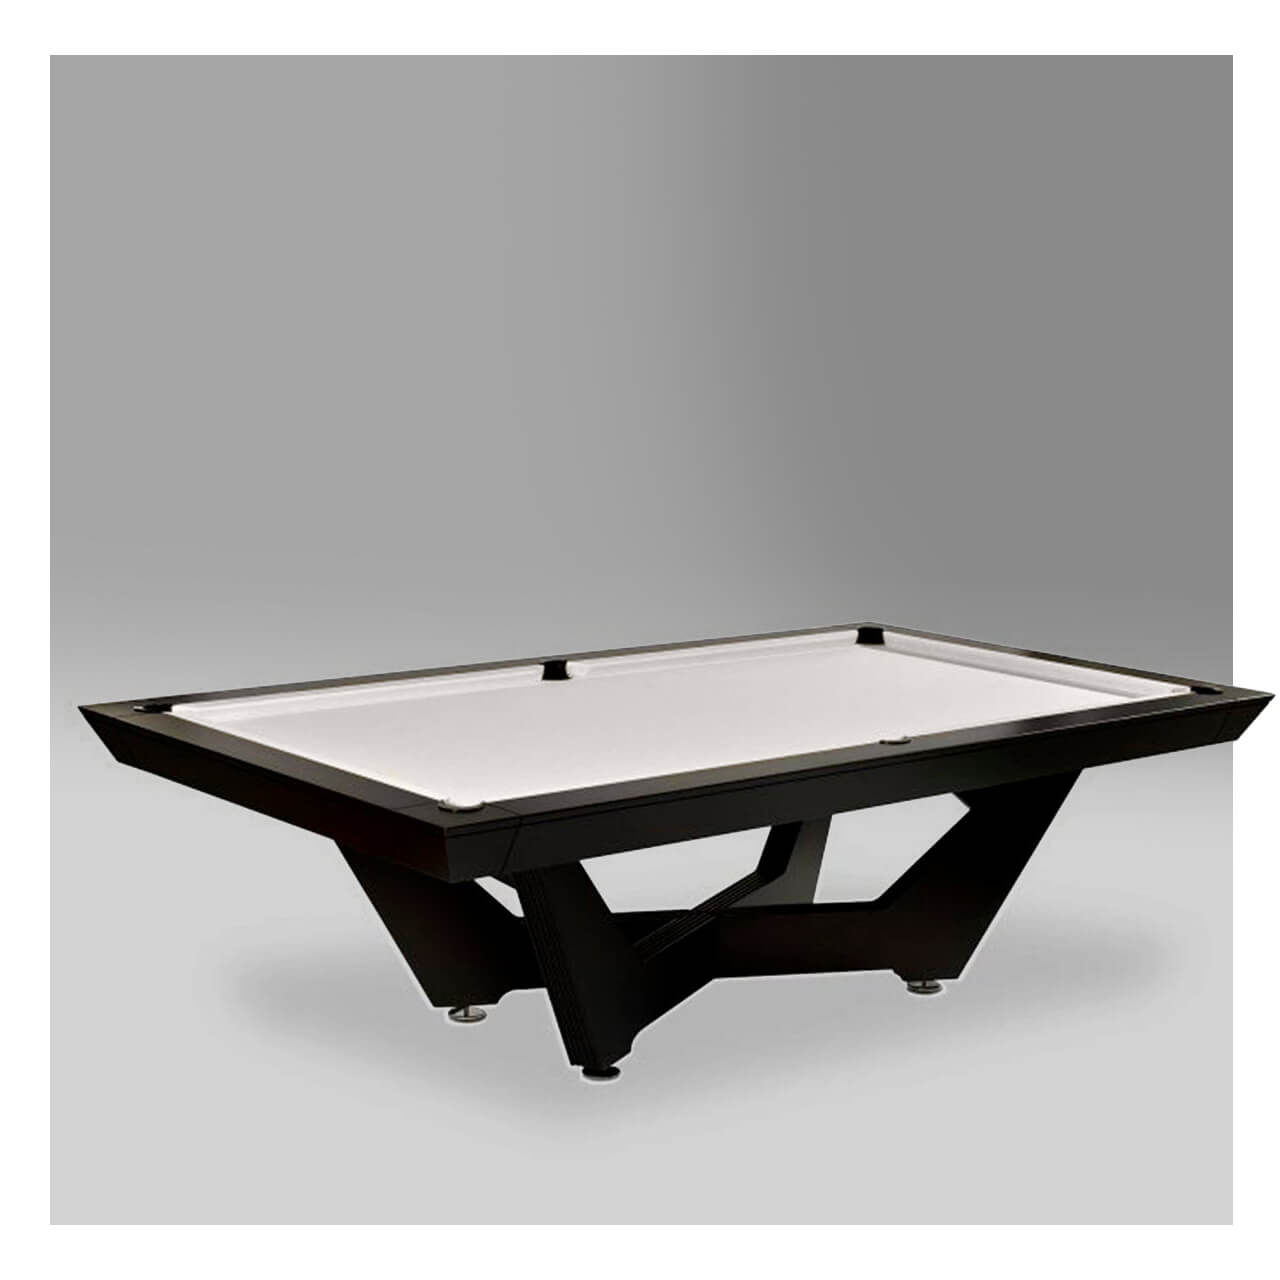 Modern Design 7' White Pool Sport Billiard Table American 8 Ball Pool Table  for Sale - China Pool Table and Snooker Pool Table price